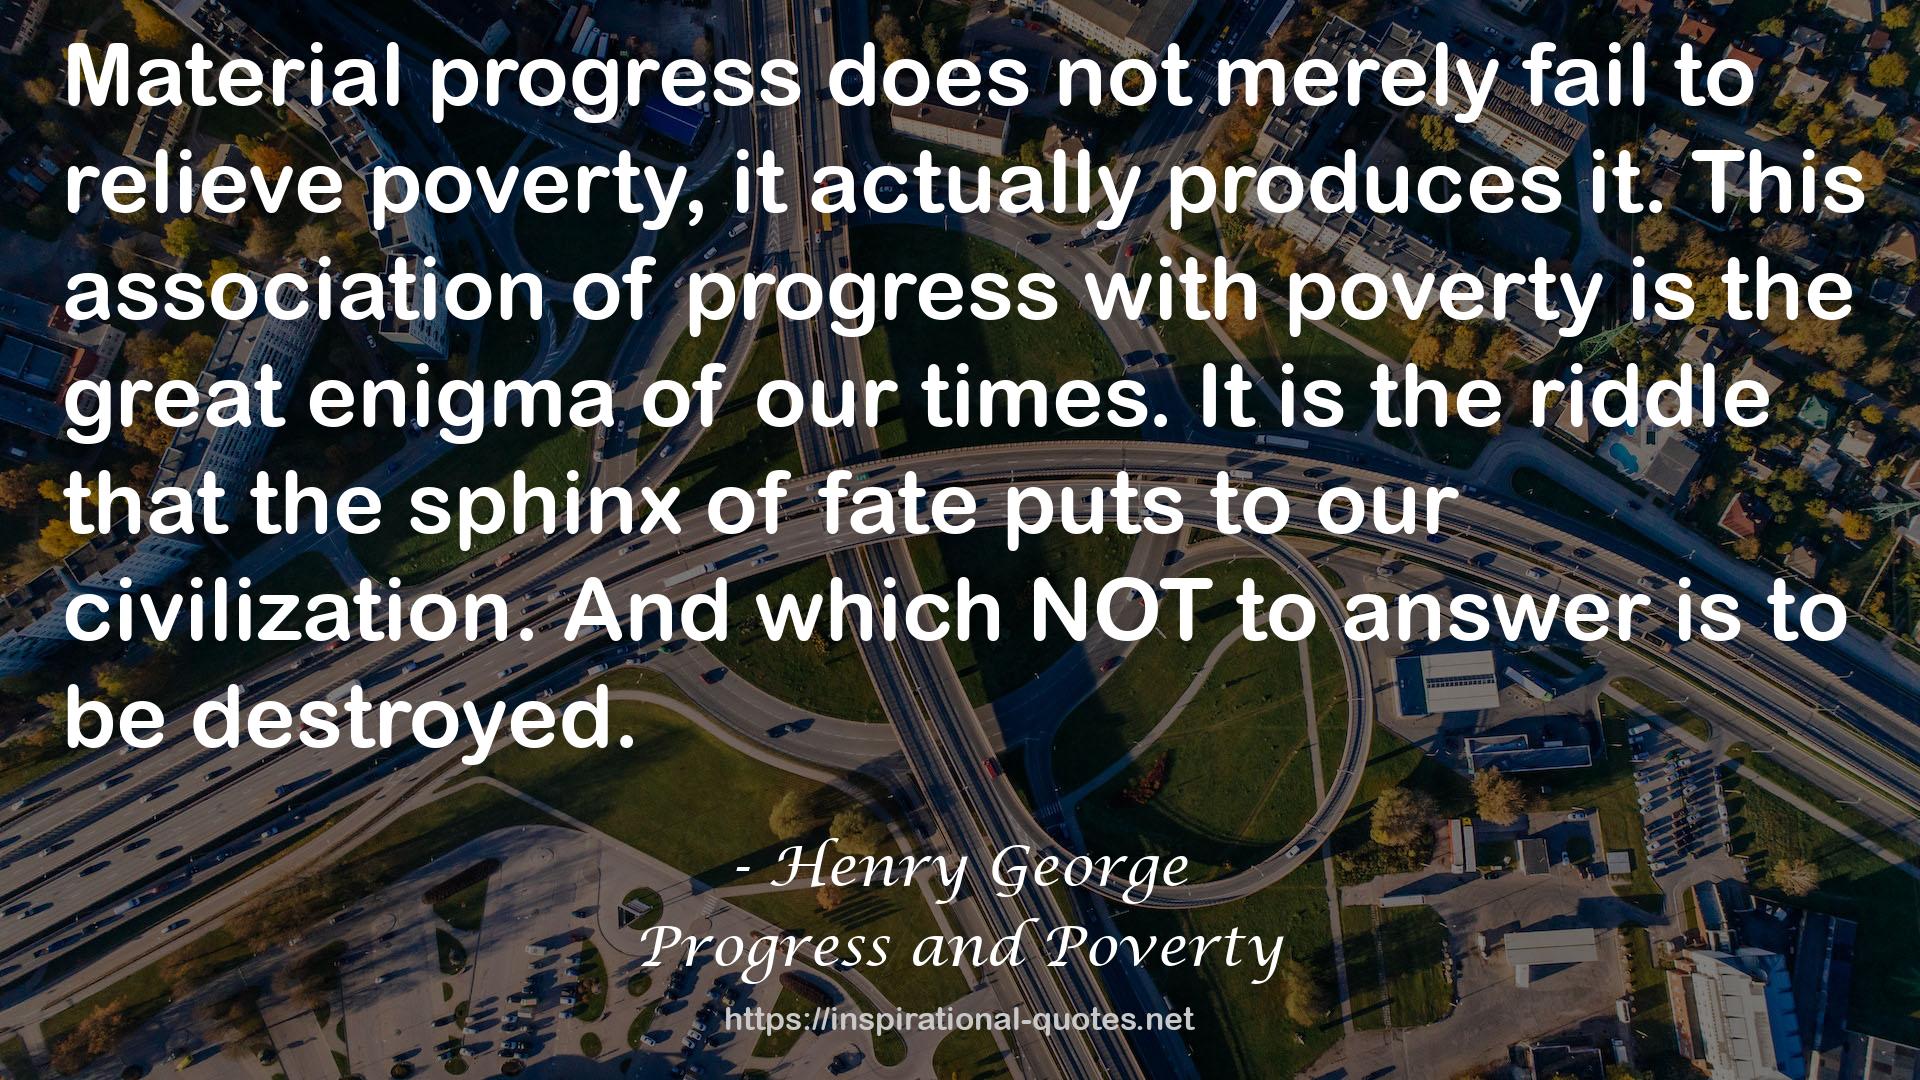 Progress and Poverty QUOTES